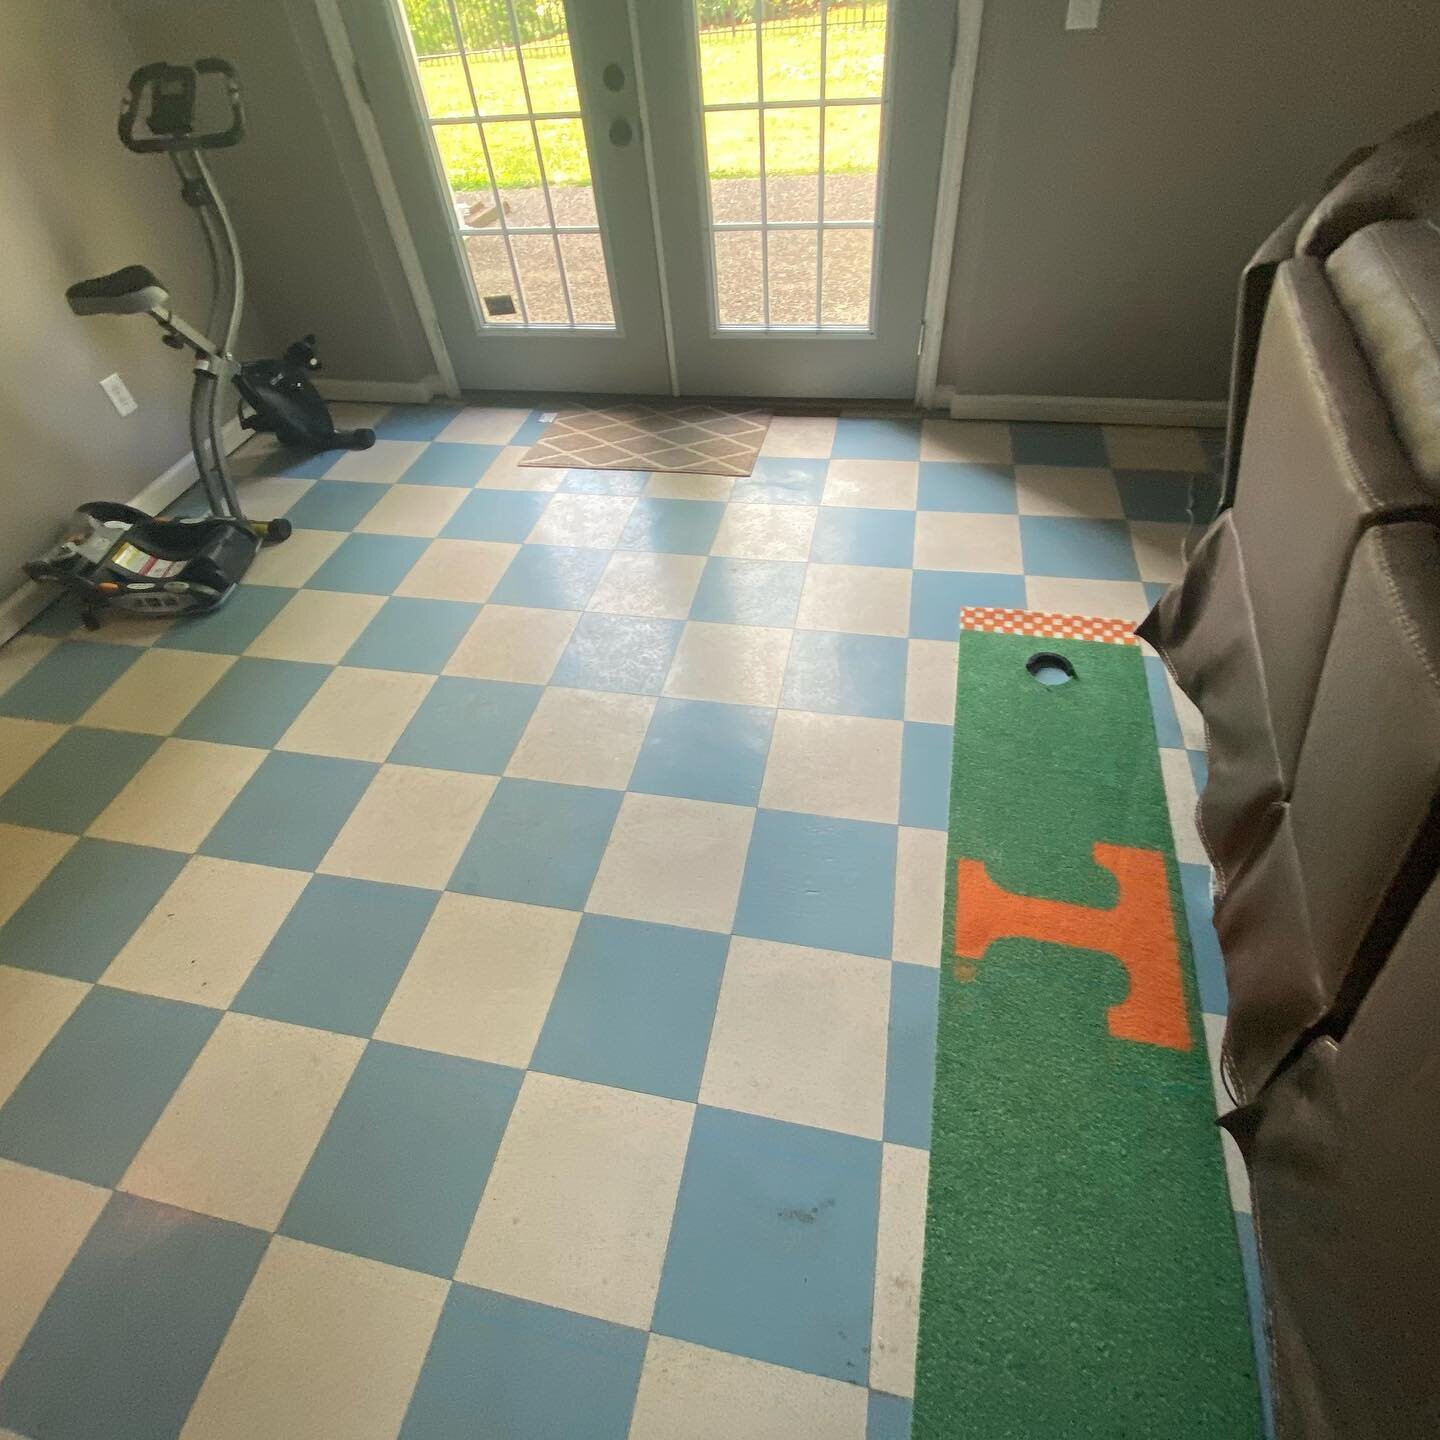 From Titans blue checkerboard tile to beautiful new water proof floors and shoe molding trim. Third Hill Construction transformed @tannerlillicrap and @catherine_lilli movie room floors